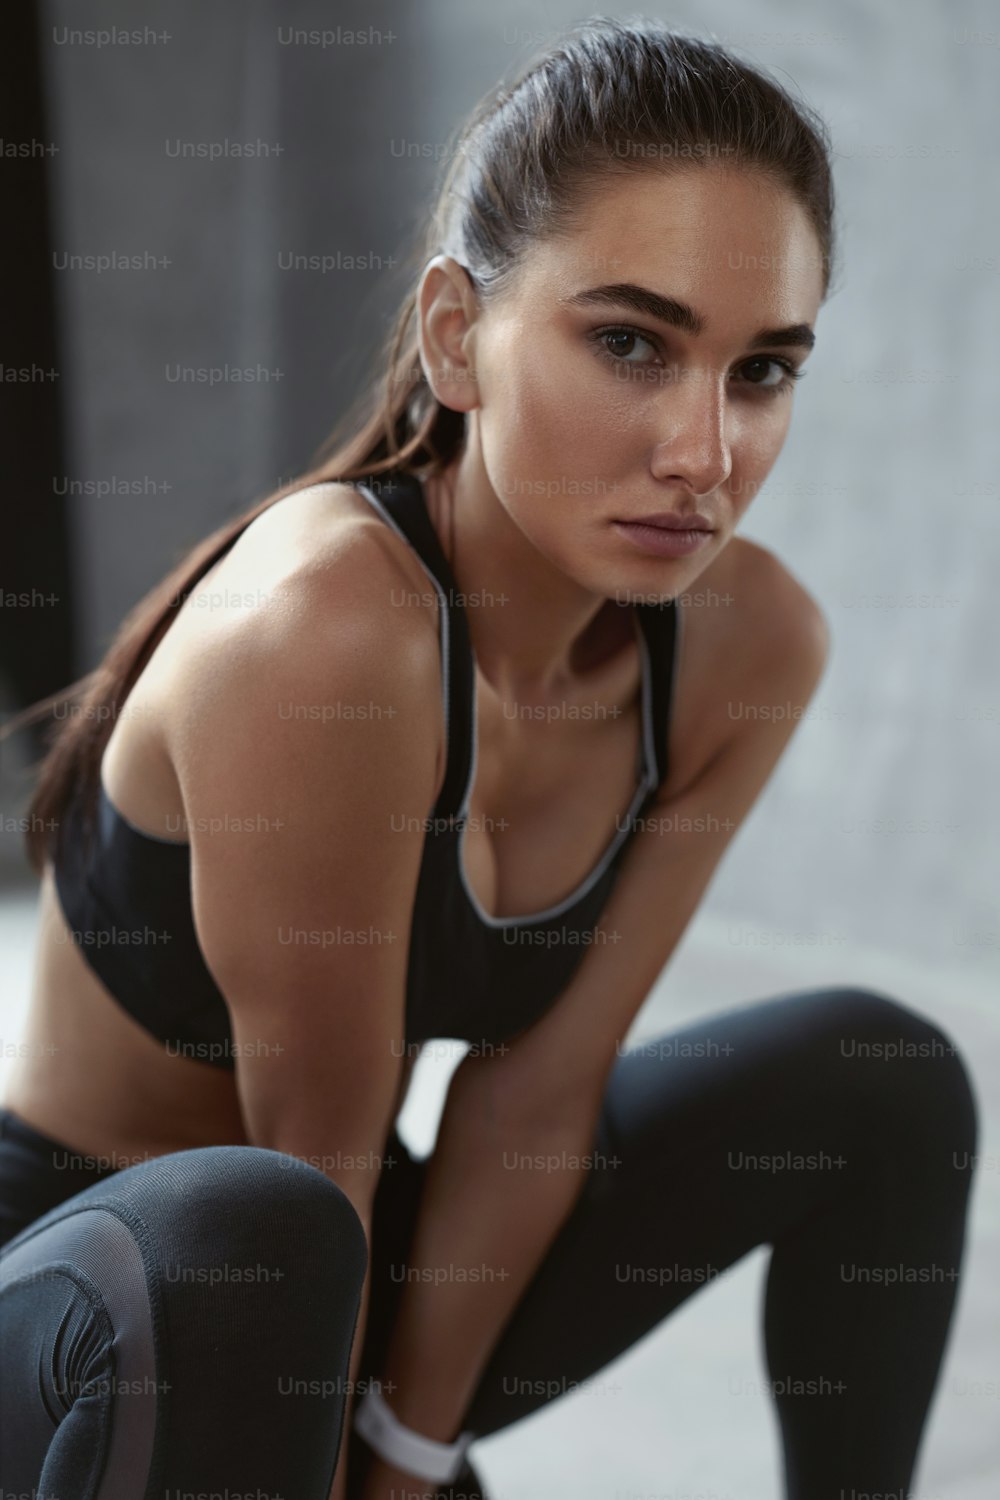 Portrait Of Fitness Woman In Fashion Sports Clothes, Beautiful Female In Black Sportswear. High Resolution